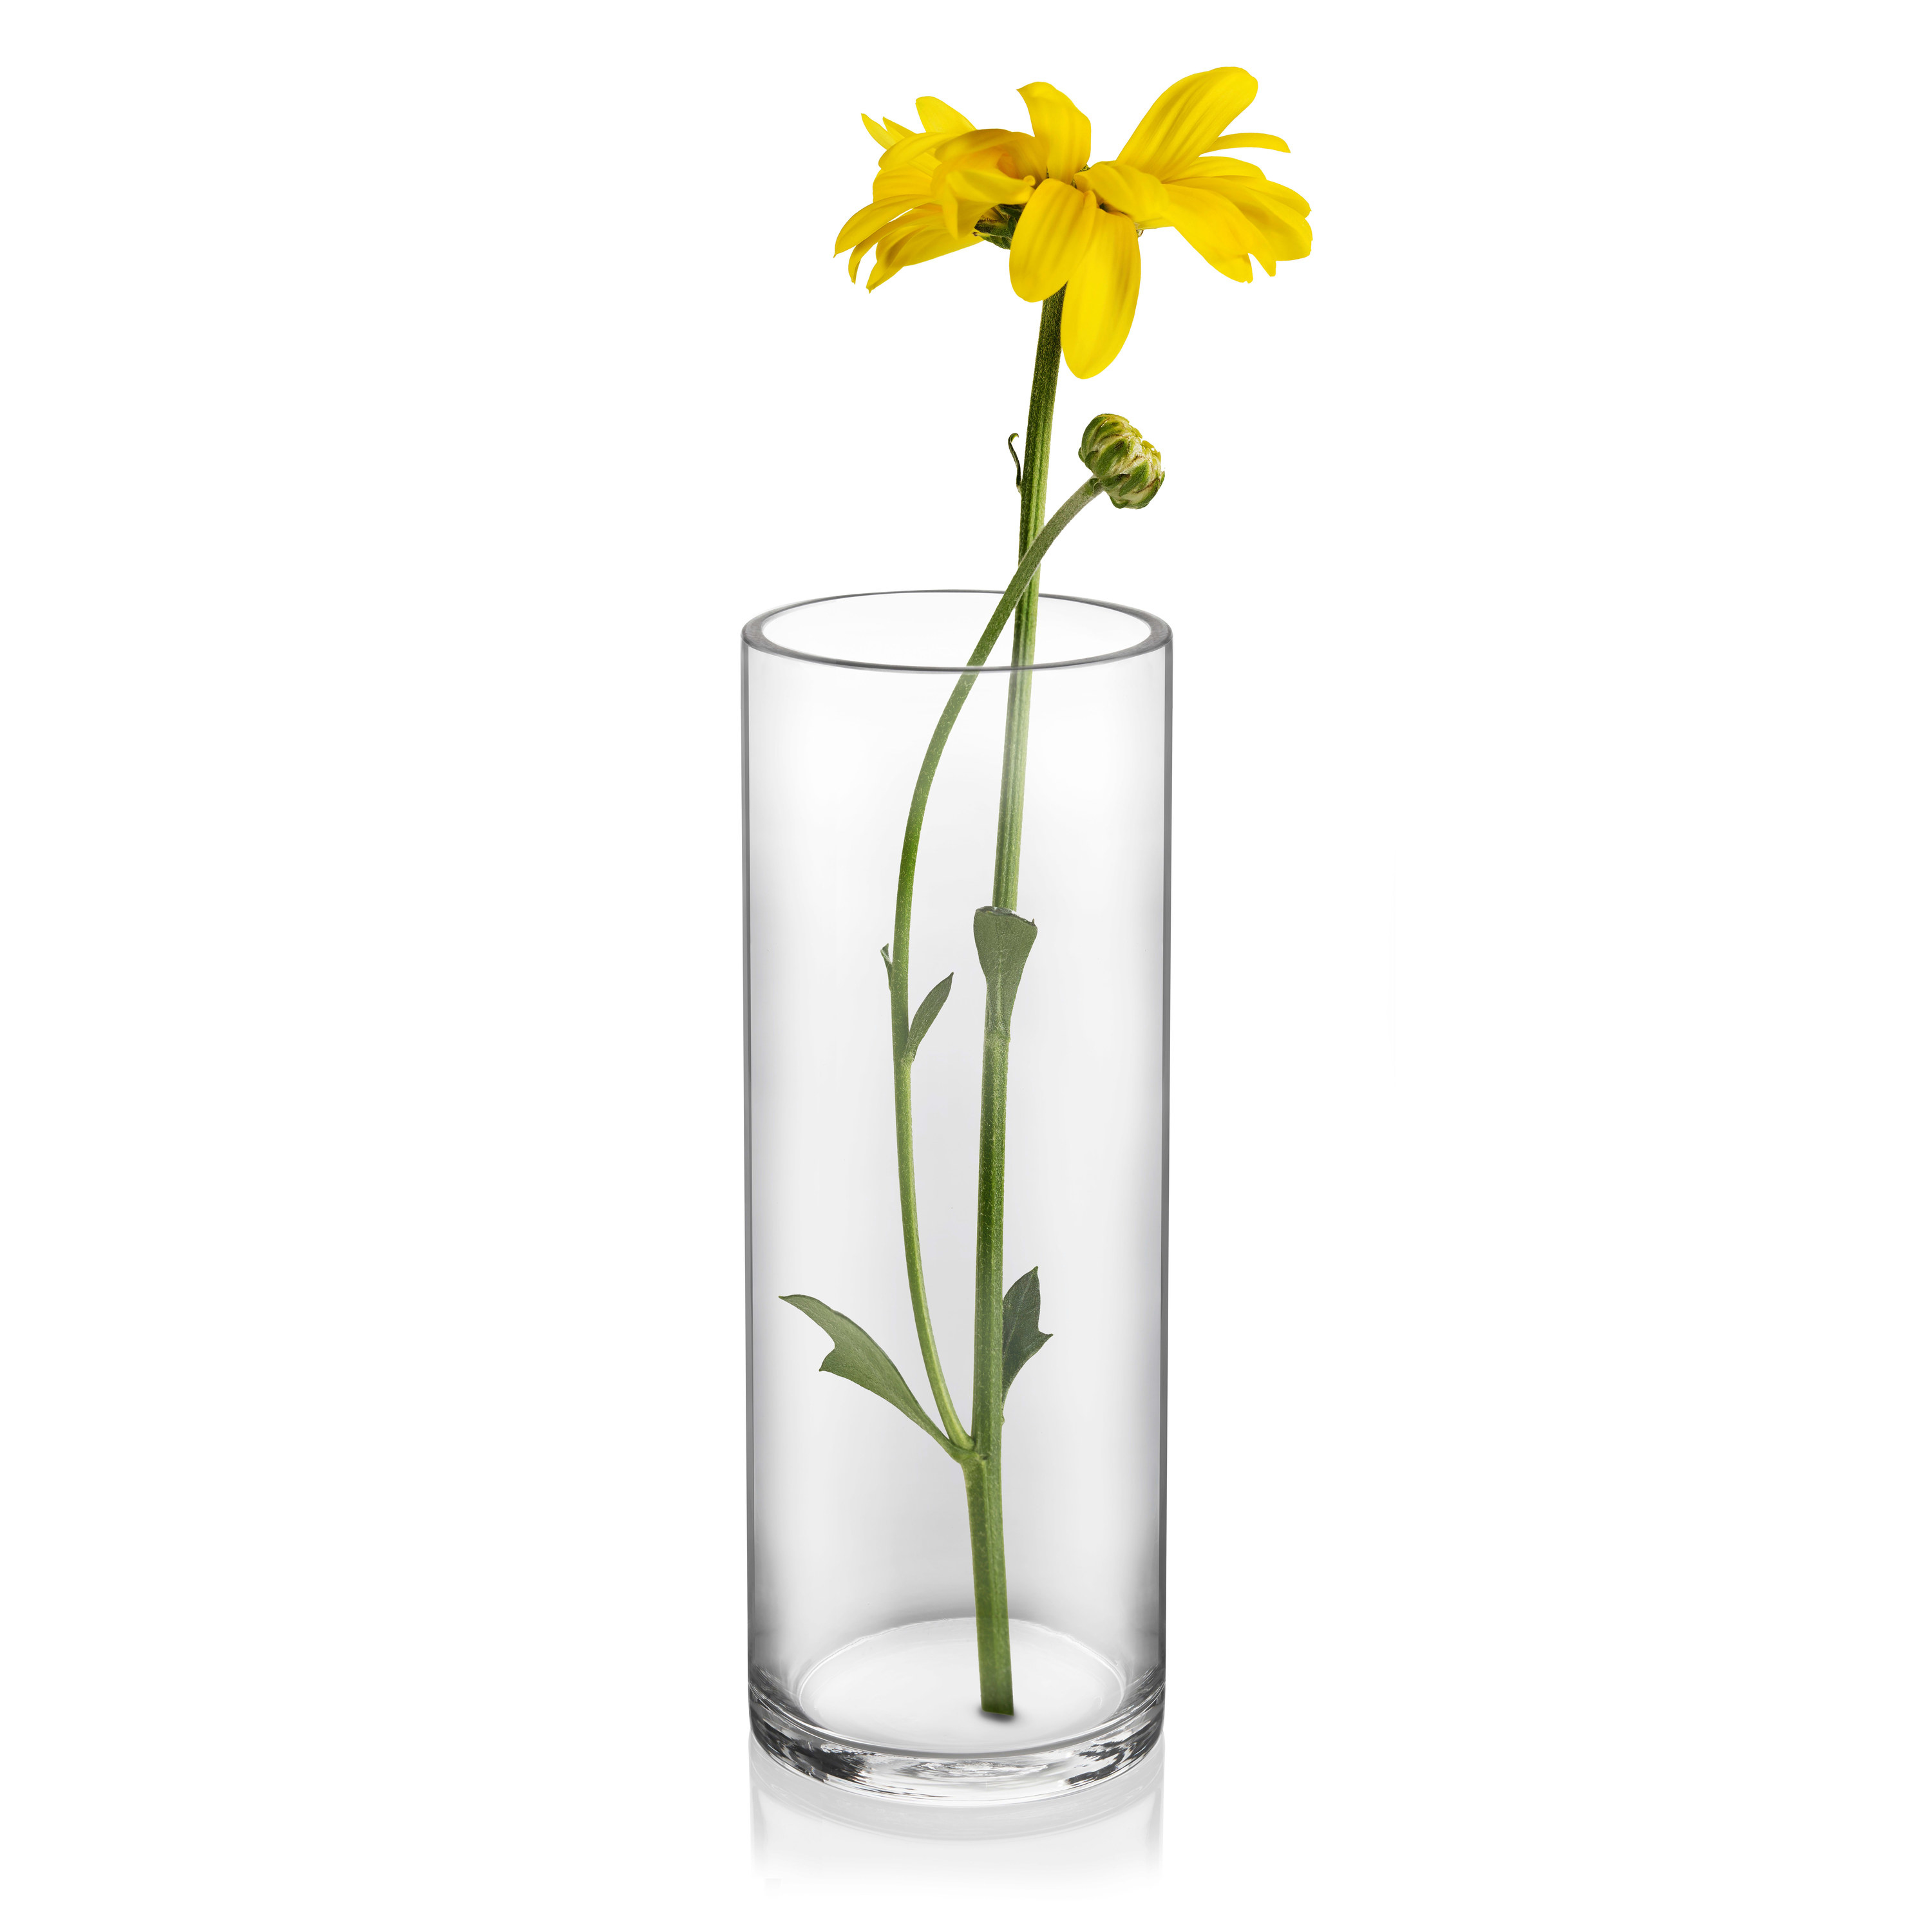 Glass vase with a flower in it 